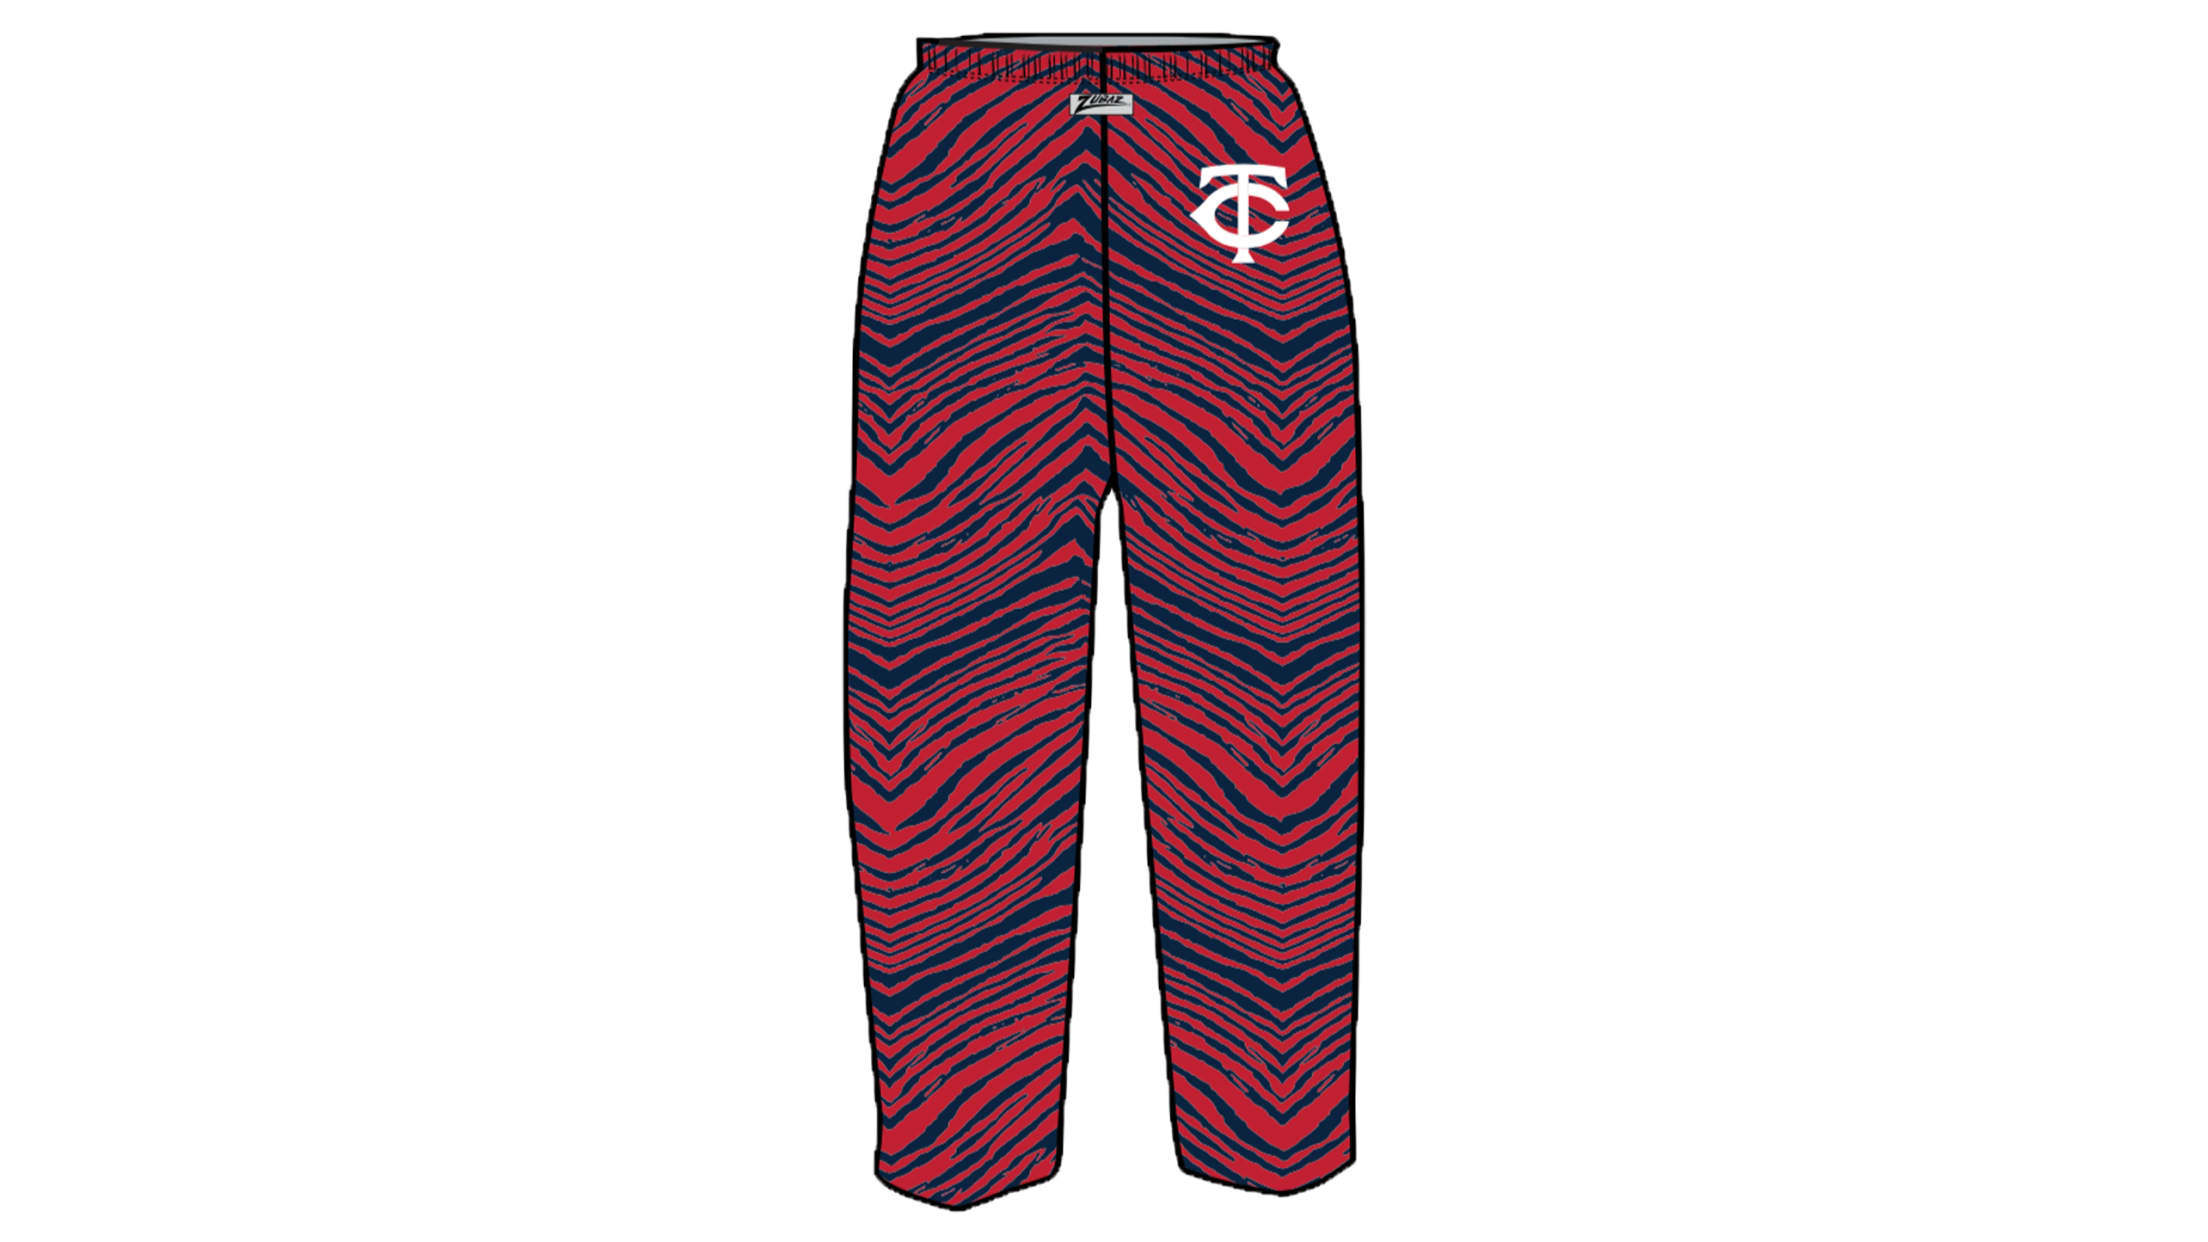 Nationals wear Zubaz pants for Blue Jays first 'home' game